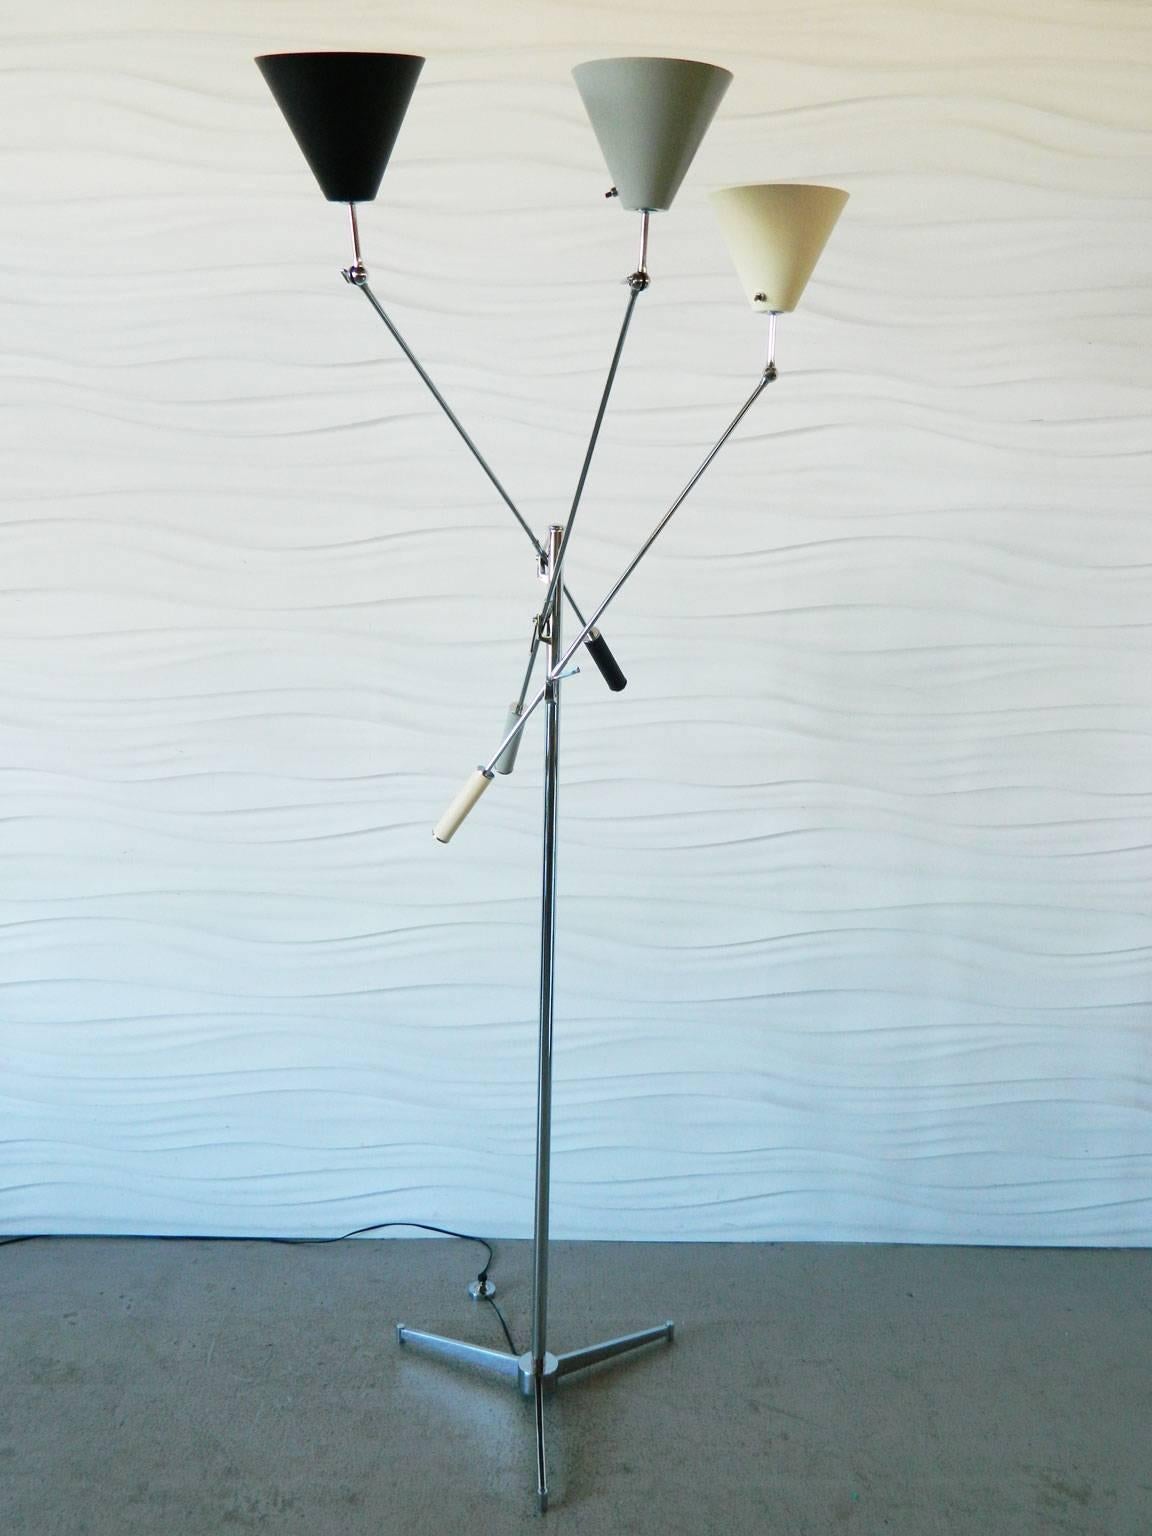 This Arredoluce floor lamp features a chrome tripod base, three arms with painted metal shades and painted handles in black, white/cream, and grey. Stamped Made in Italy/Arreduloce Monza

Floor Lamp Footprint
Main stalk measures 61.5